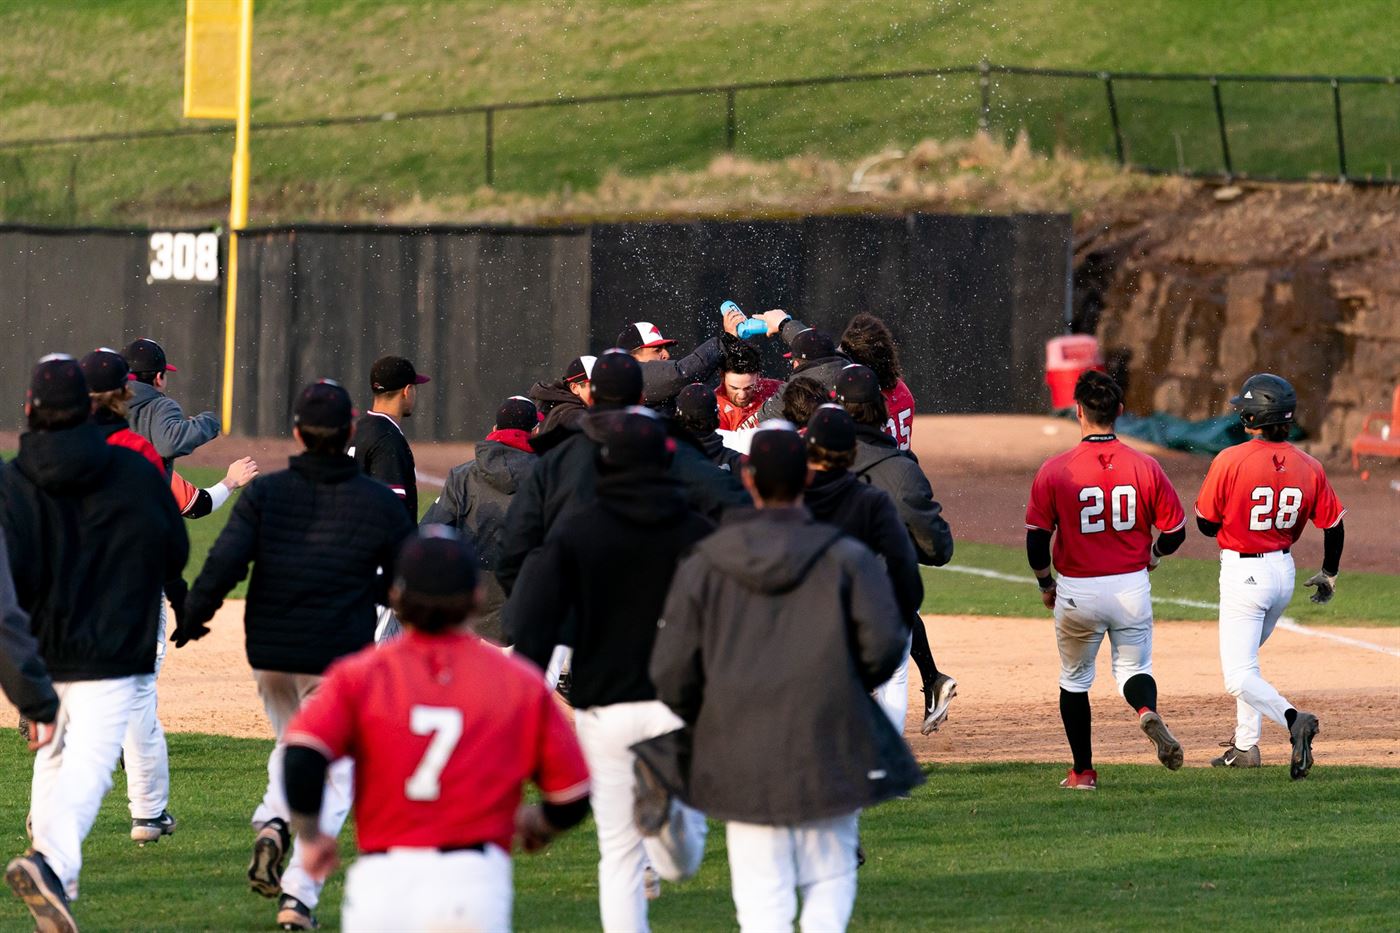 Teammates rush over to senior infielder Jason Moore after delivering the game-winning run. Chris Krusberg | The Montclarion